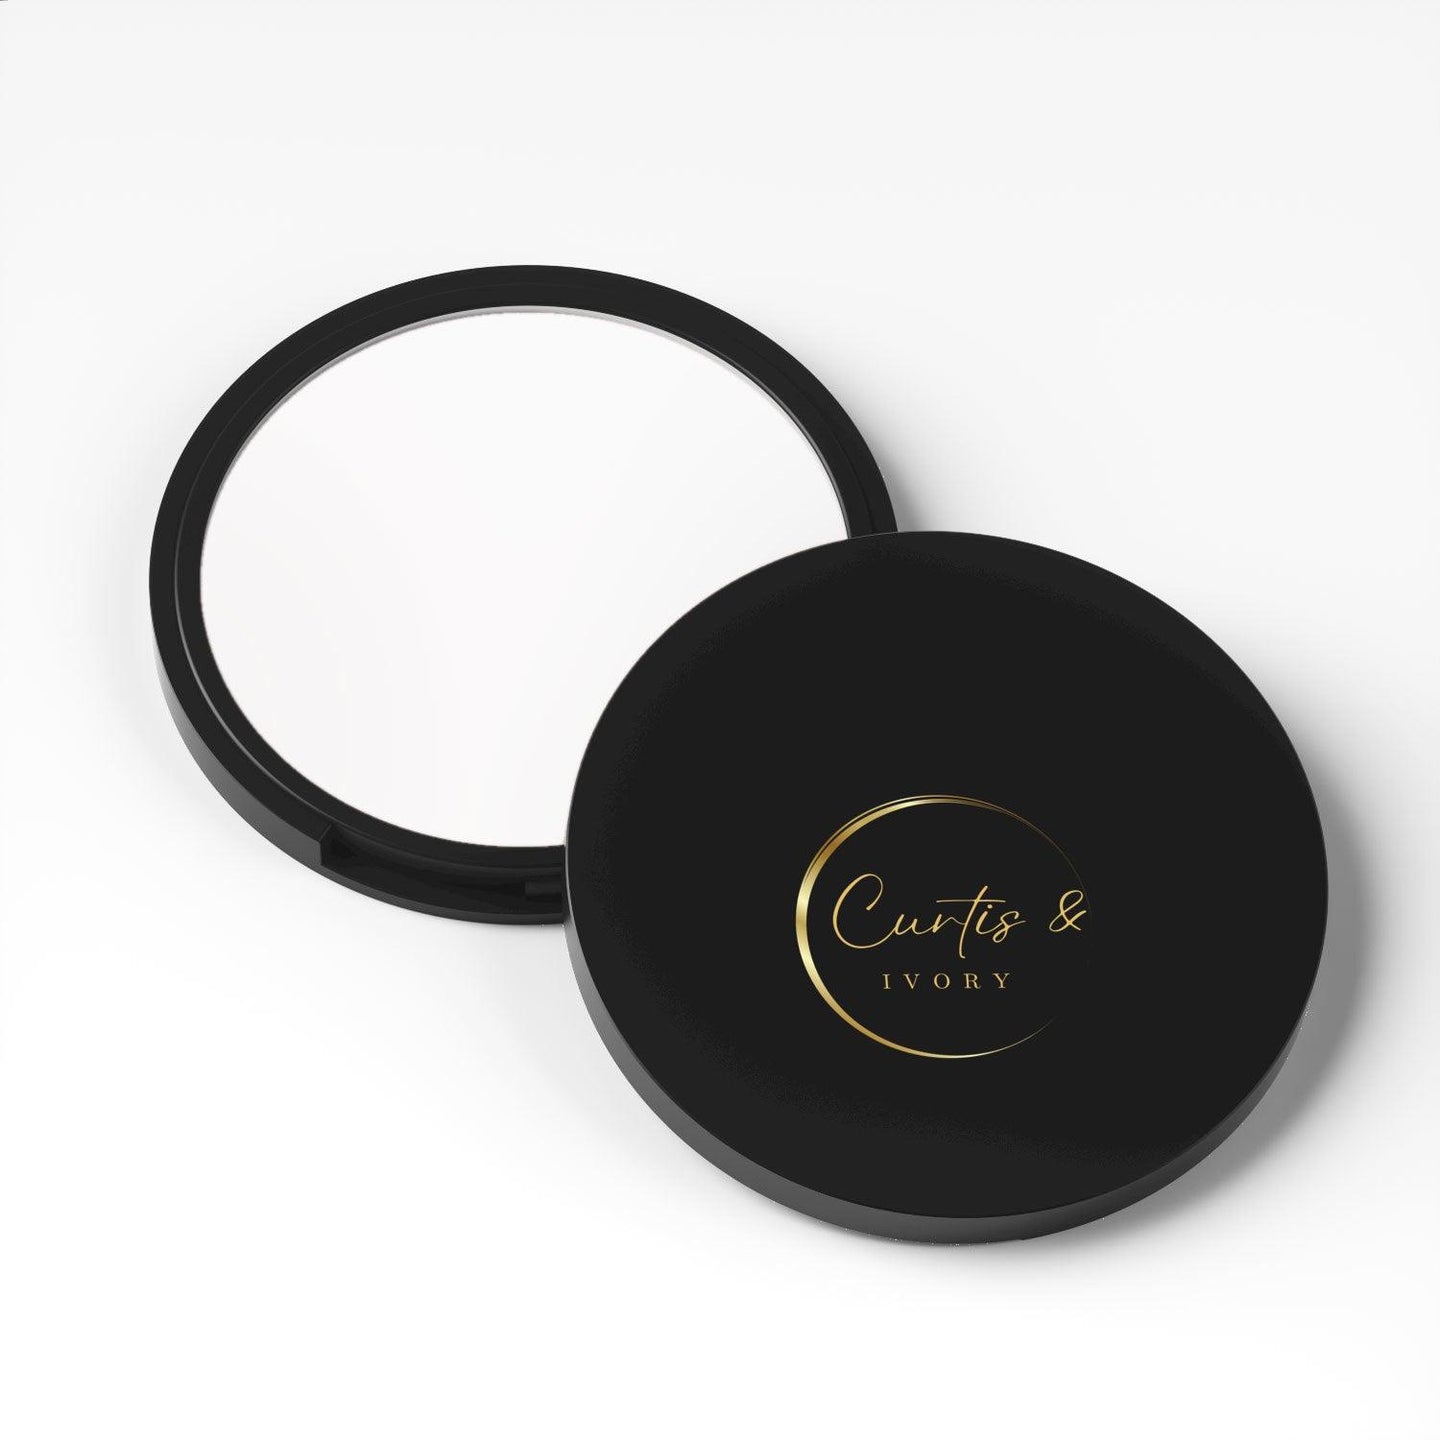 Curtis & Ivory Transparent Compact Powders. soft and invisible powder ideal for everyday wear blurs fine lines and protects skin - Curtis & Ivory